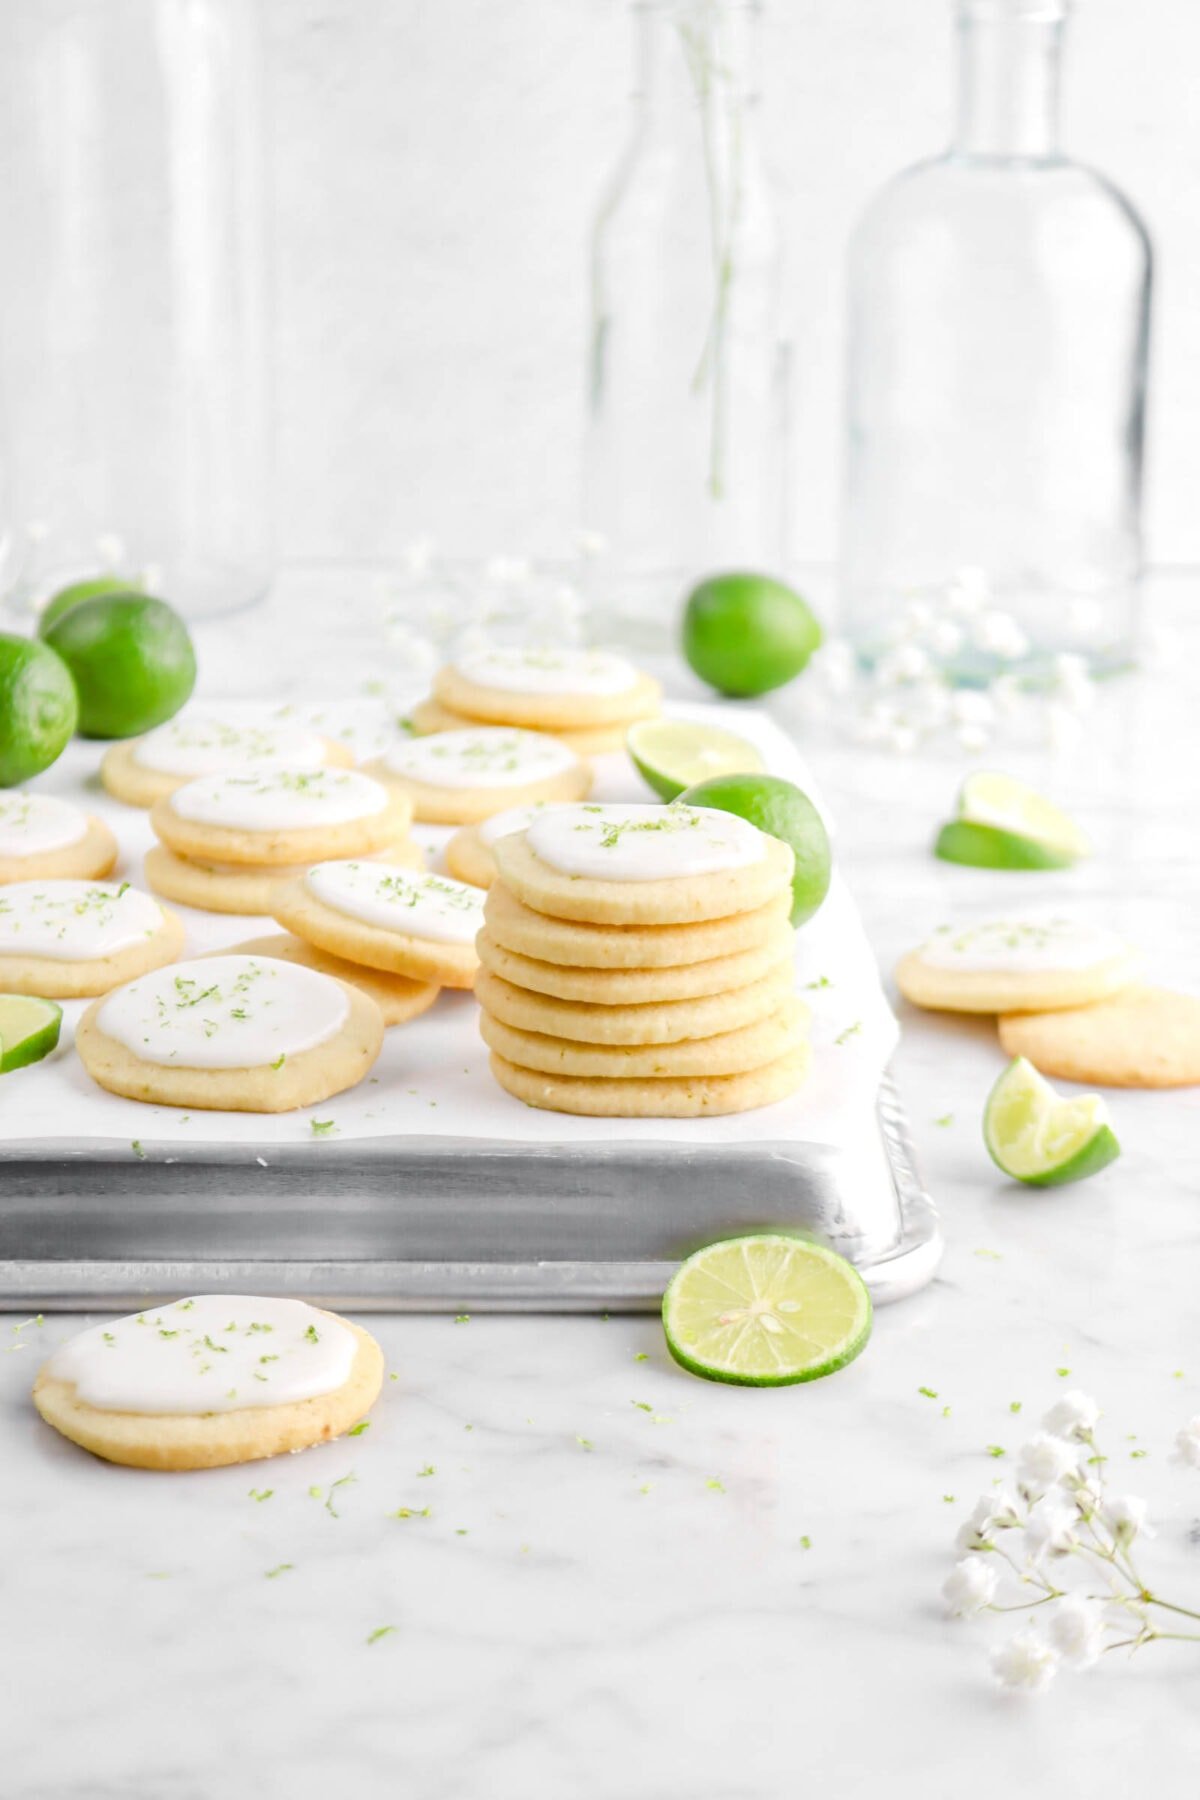 front shot of stacked key lime shortbread cookies on upside down pan with more cookies around, key limes, white flowers, and empty glass jars behind